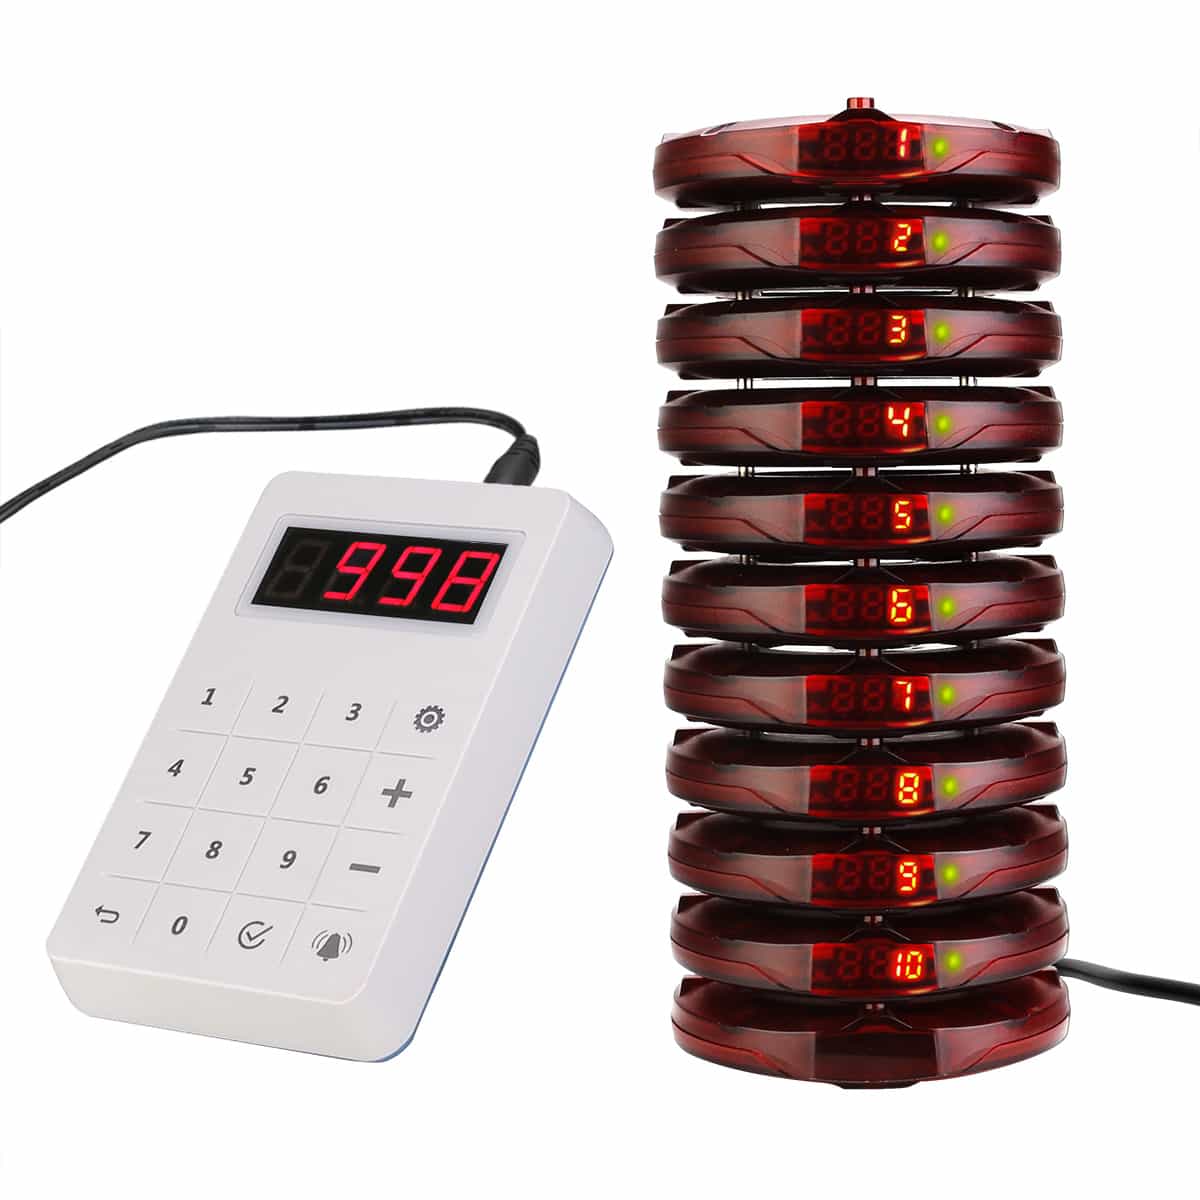 Restaurant Wireless Paging Queuing System+10 Anruf Coaster Pager für Auto-Shop 